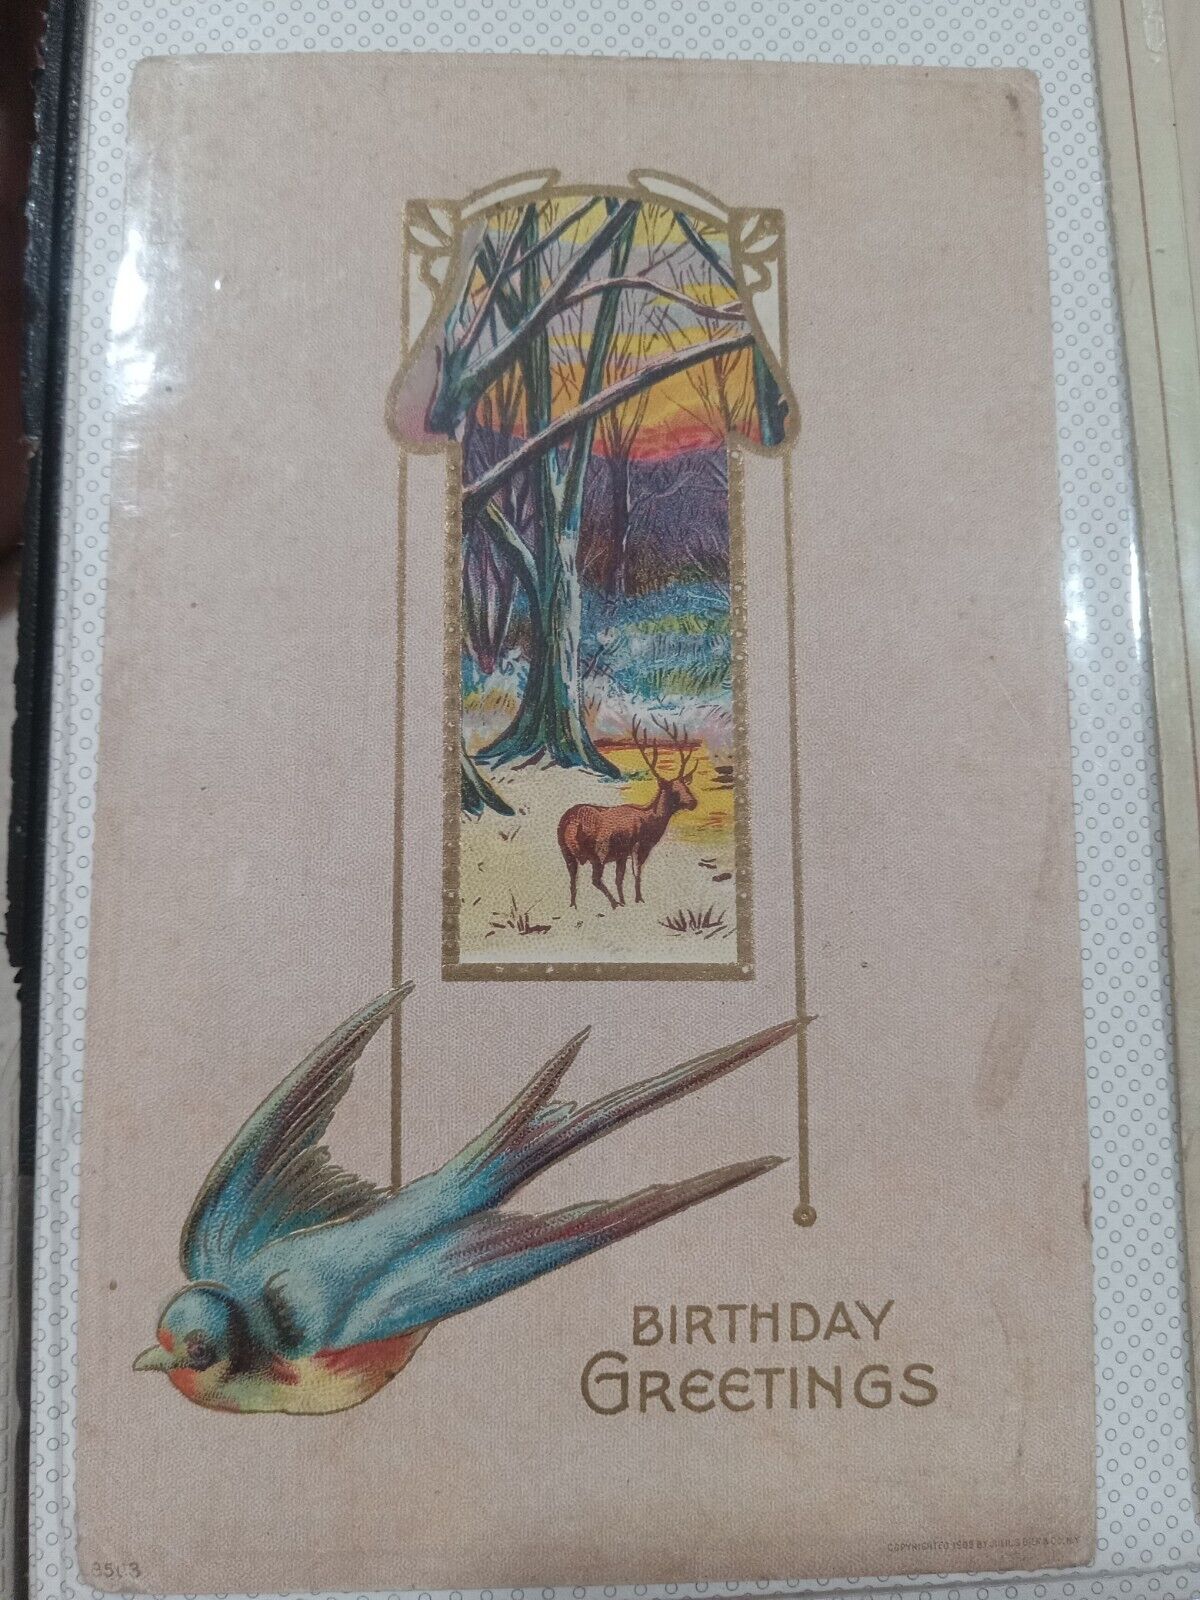 *Antique* Birthday Greetings Card 1909*Excellent Color *Well Preserved*